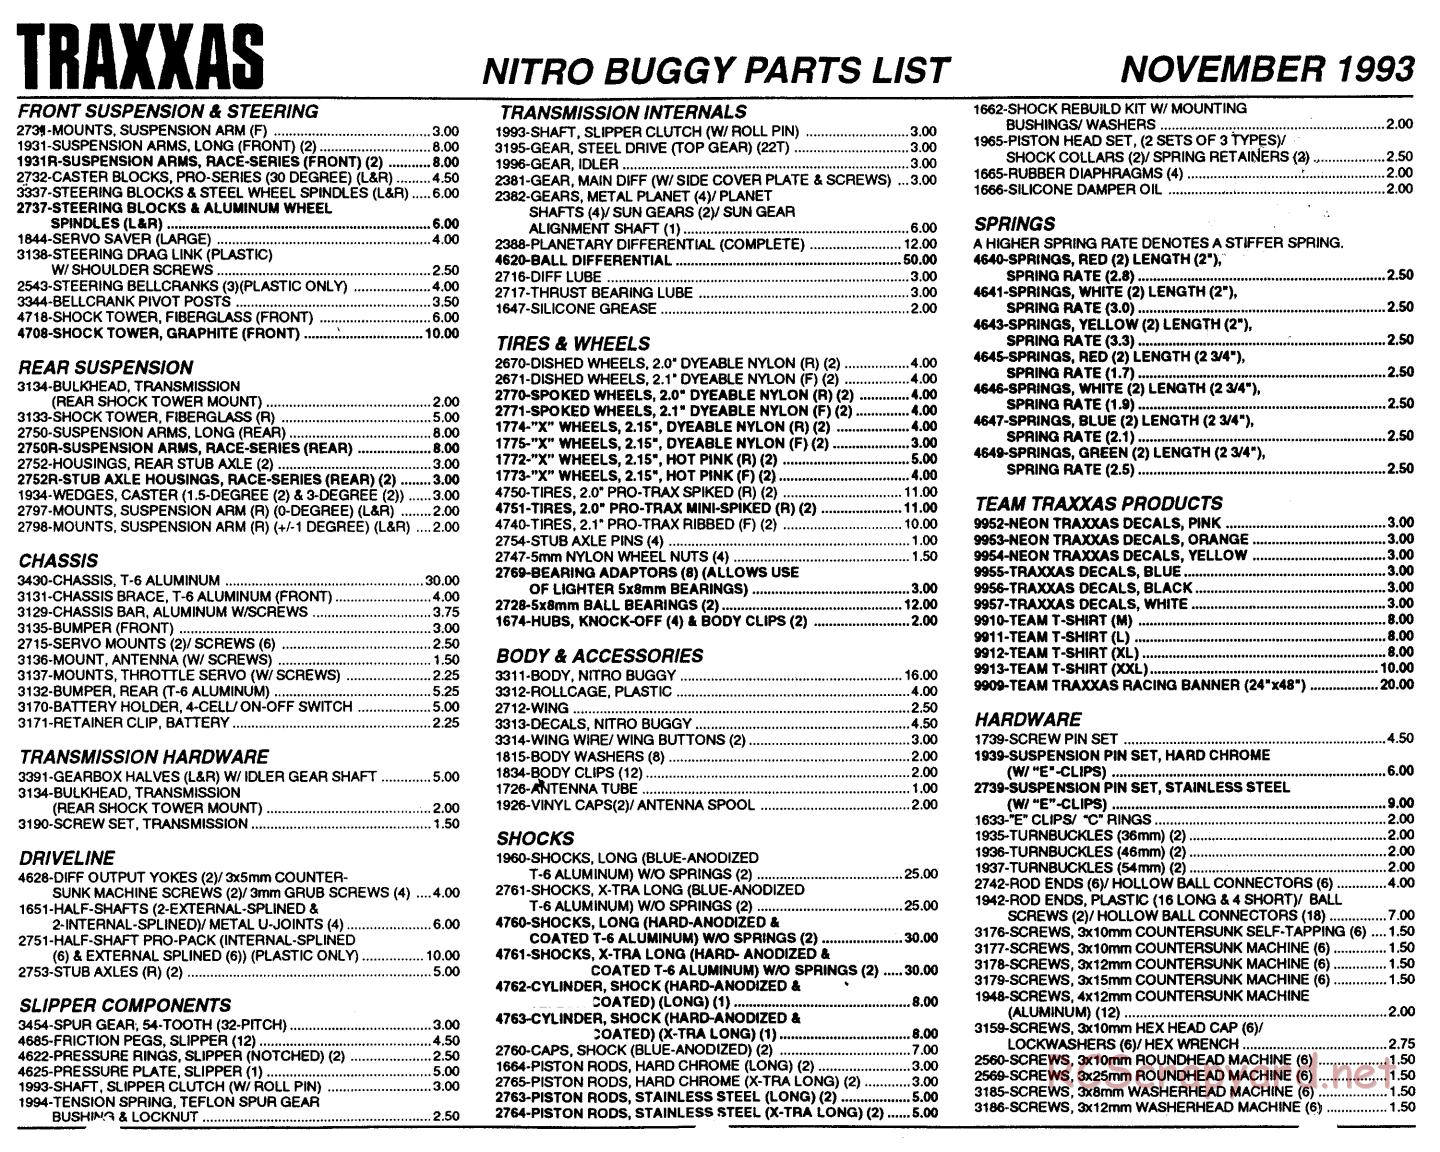 Traxxas - Nitro Buggy (1993) - Parts List - Page 1